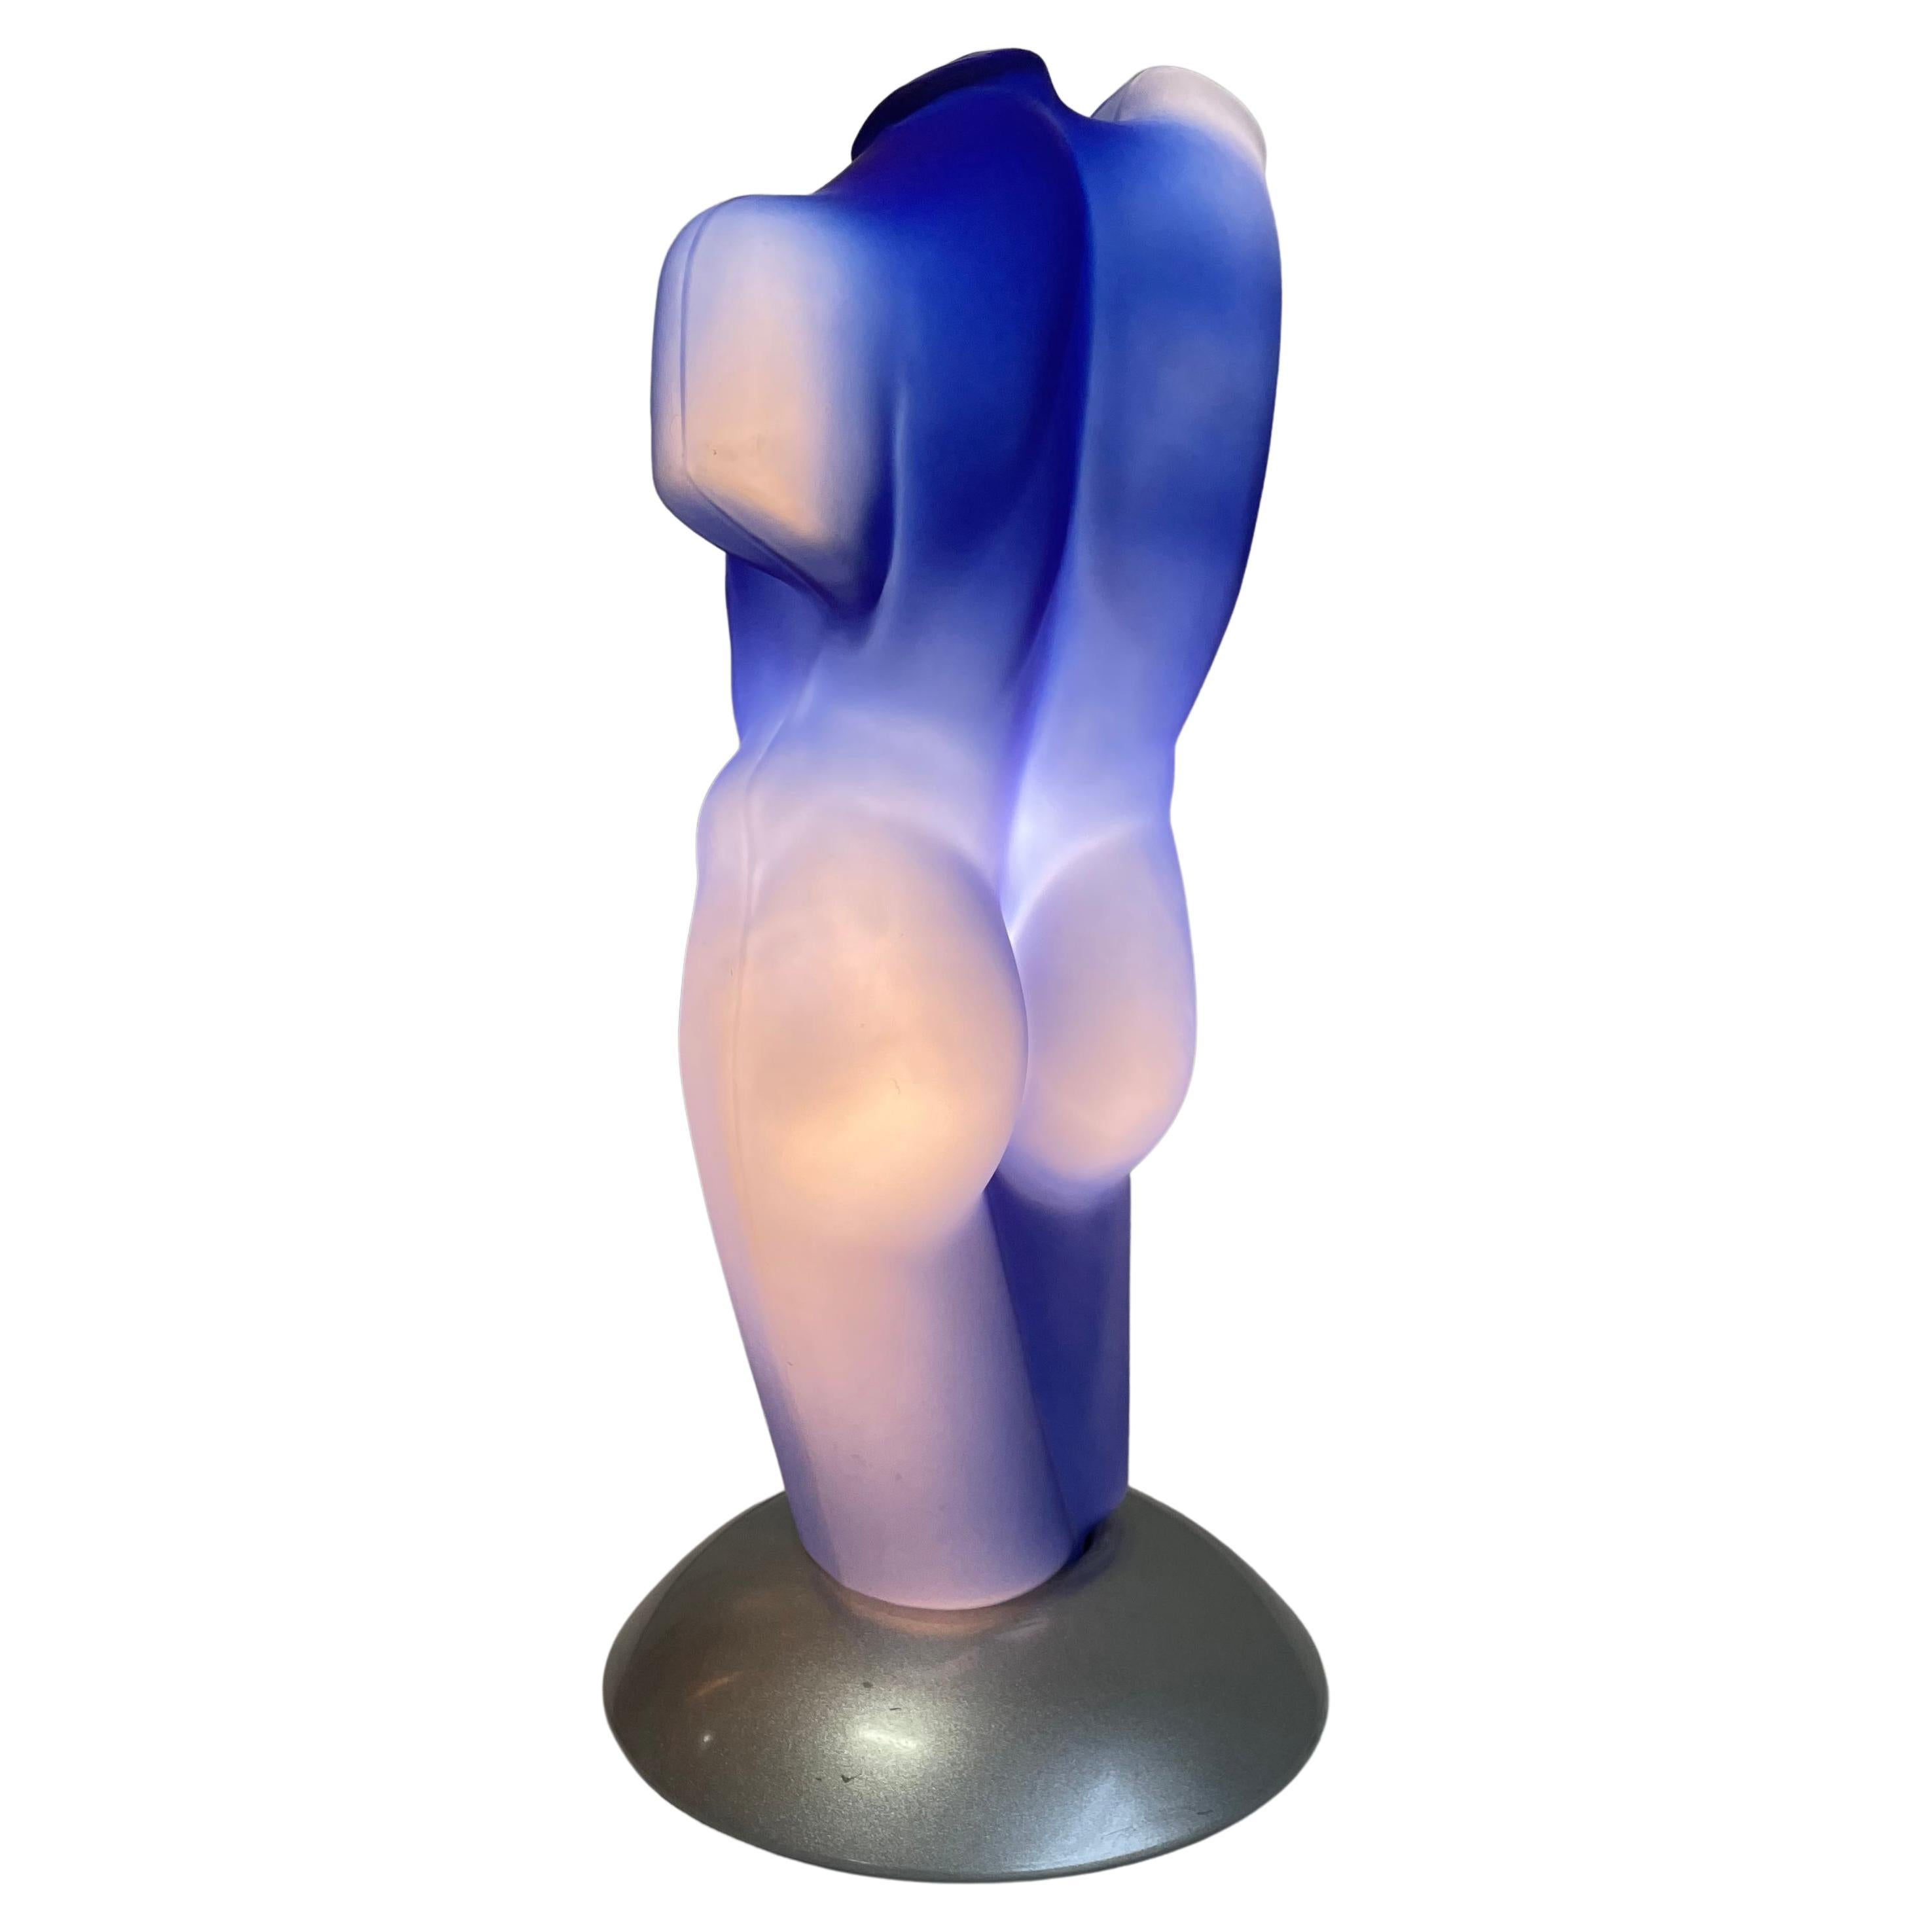 Italian postmodern table lamp features a stunning Yves Klein blue frosted glass sculptural lampshade in the form of a classical Greek god's male torso.
The base of the lamp is made of metal painted in grey-silver color with a metallic finish.

The